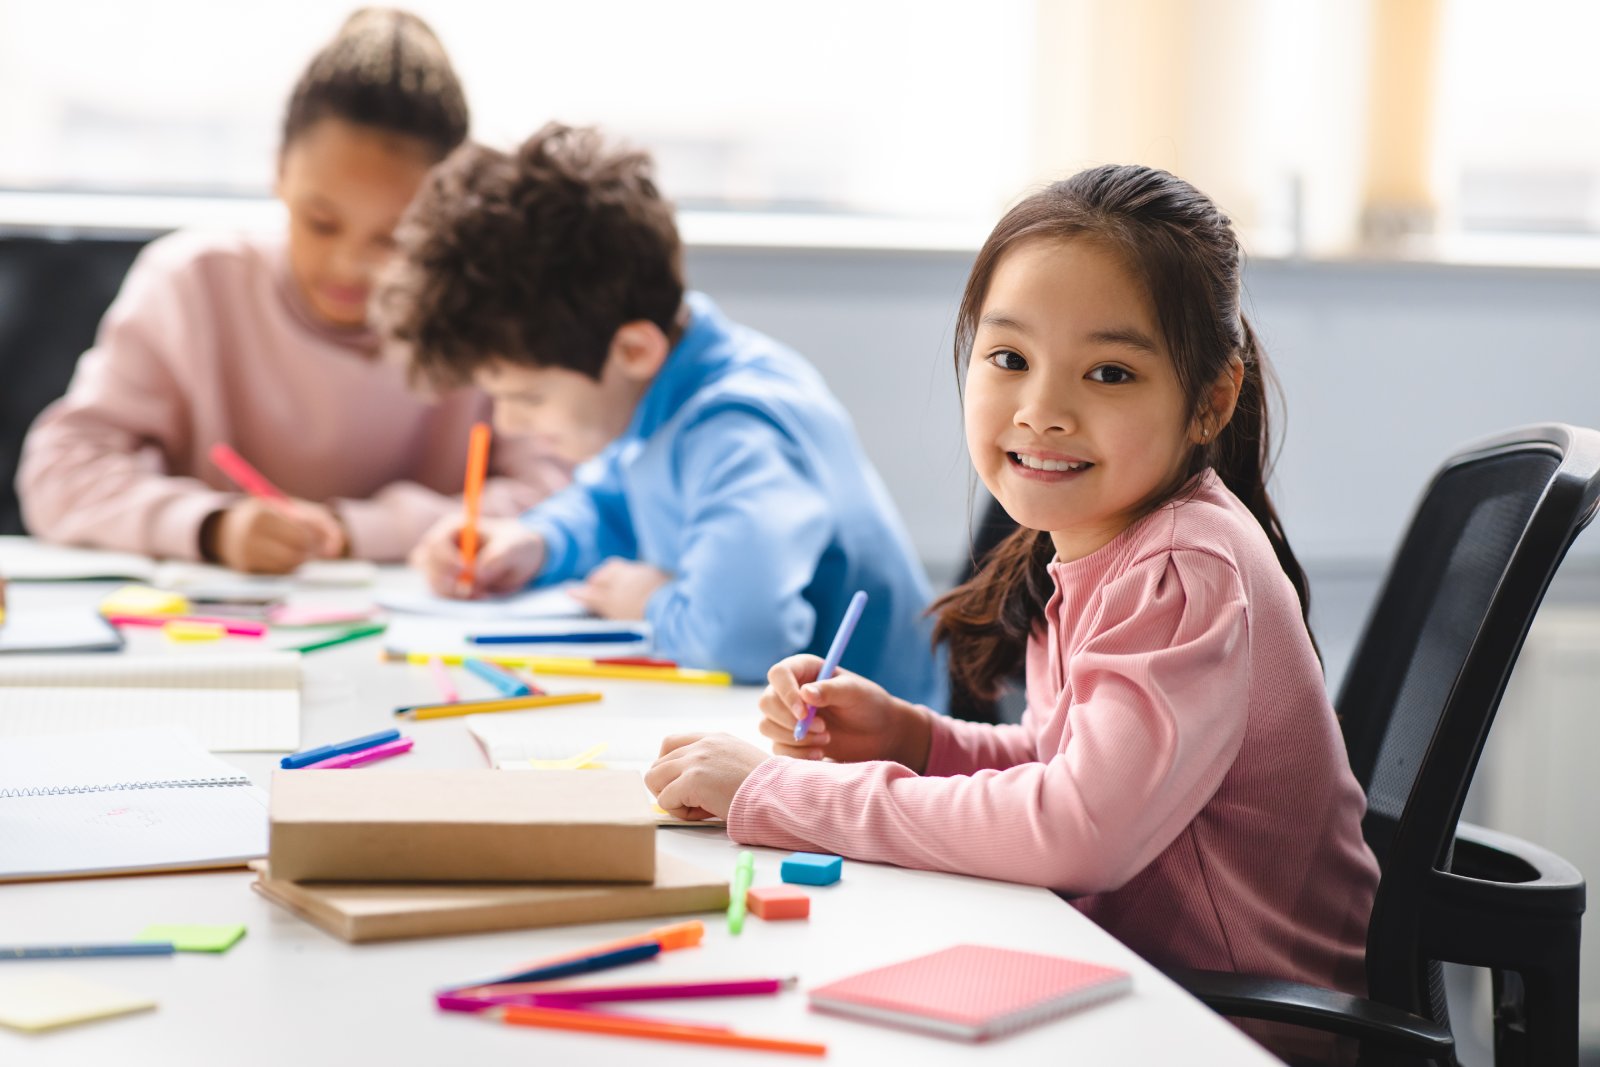 Image Credit: Shutterstock / Prostock-studio <p>Activities like drawing, building blocks, or crafting during play help develop fine motor skills, which are crucial for writing, typing, and other precise movements.</p>